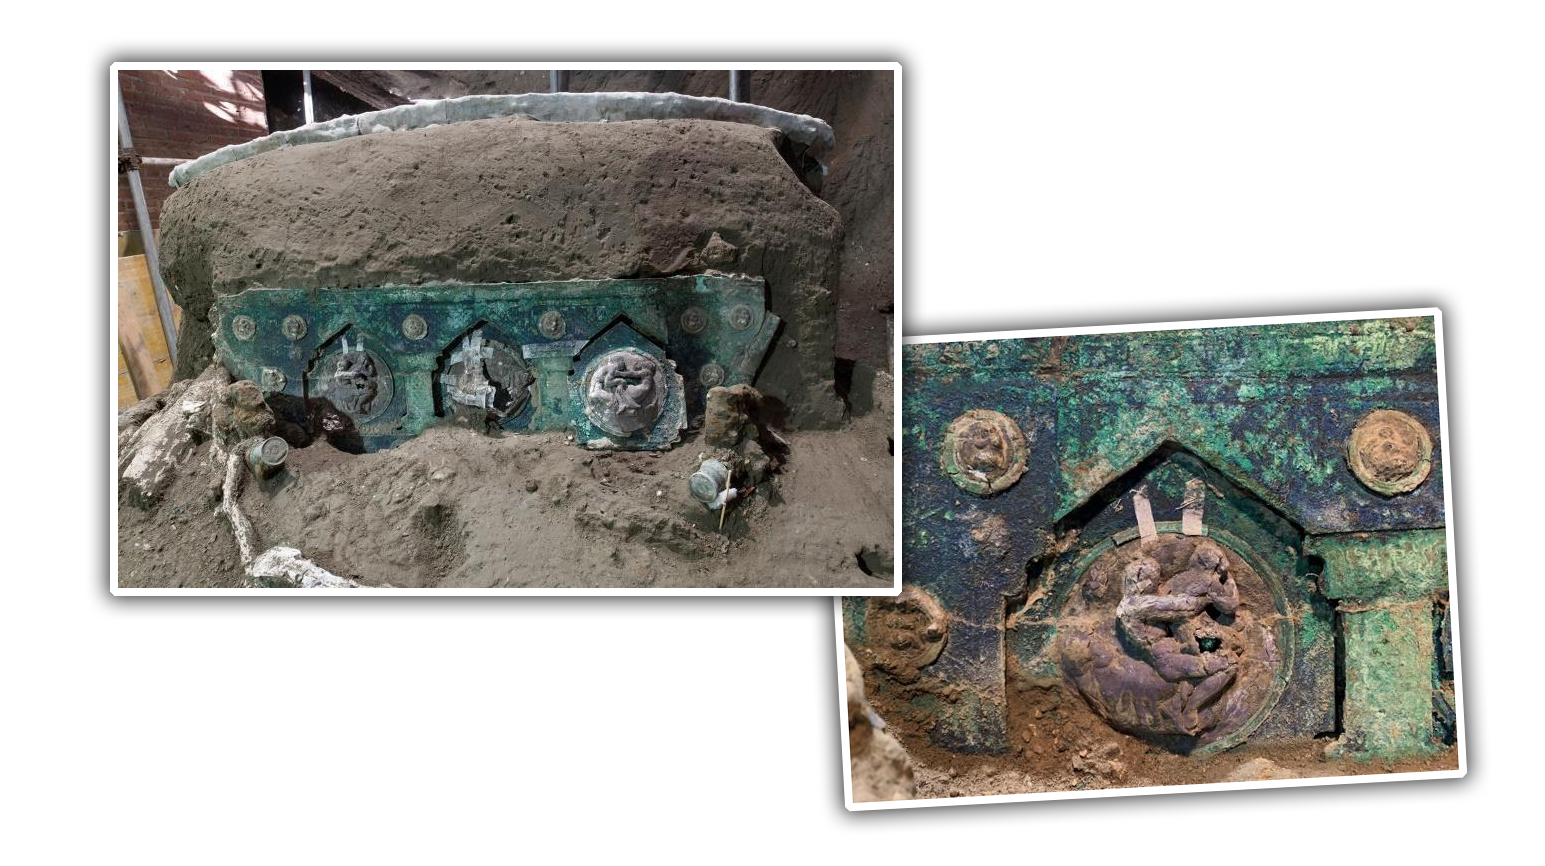 Sweet-Ass Four-Wheel ‘Lamborghini’ Chariot Discovered In Ruins Of Pompeii, Likely Ran When Parked